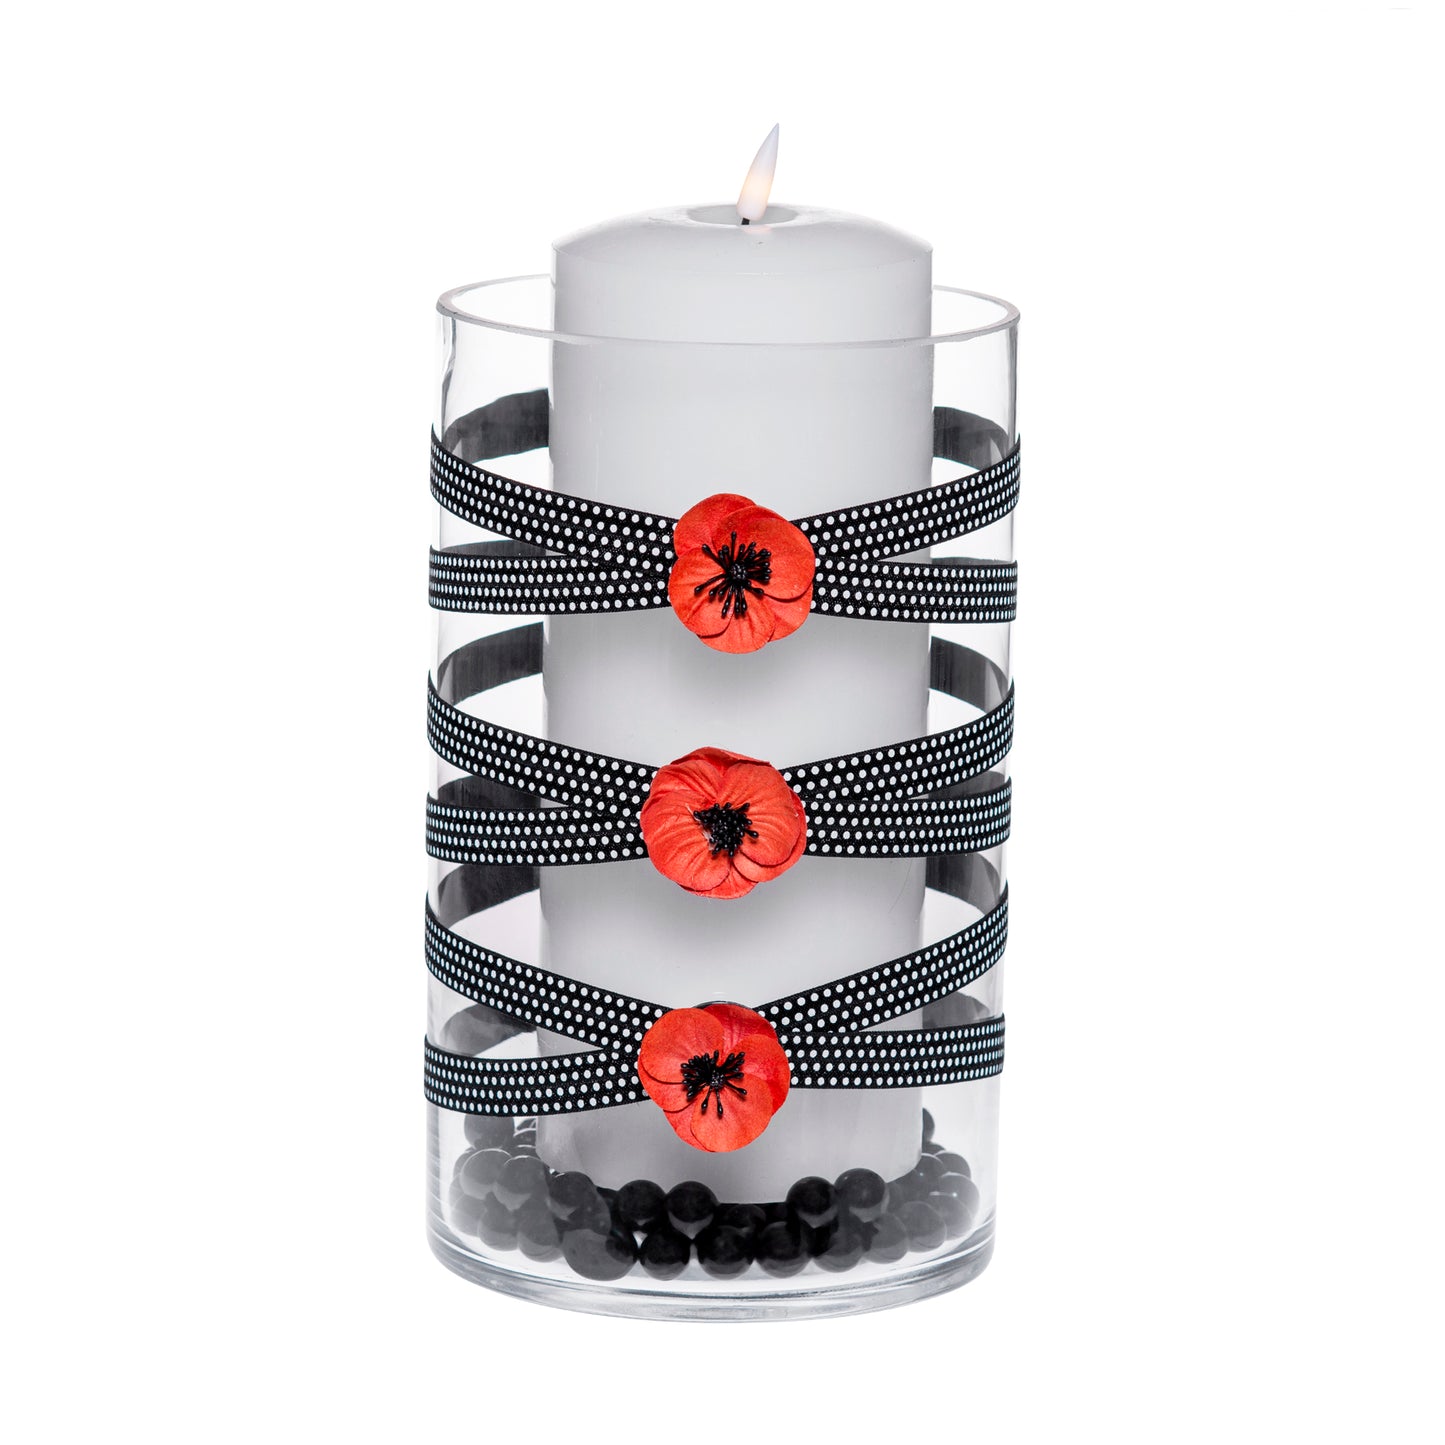 6" x 10" Cylinder Black White Polka Dot 5X 6 Rust Red Poppies Halloween-ish Fall-O-Ween Collection Complete Set